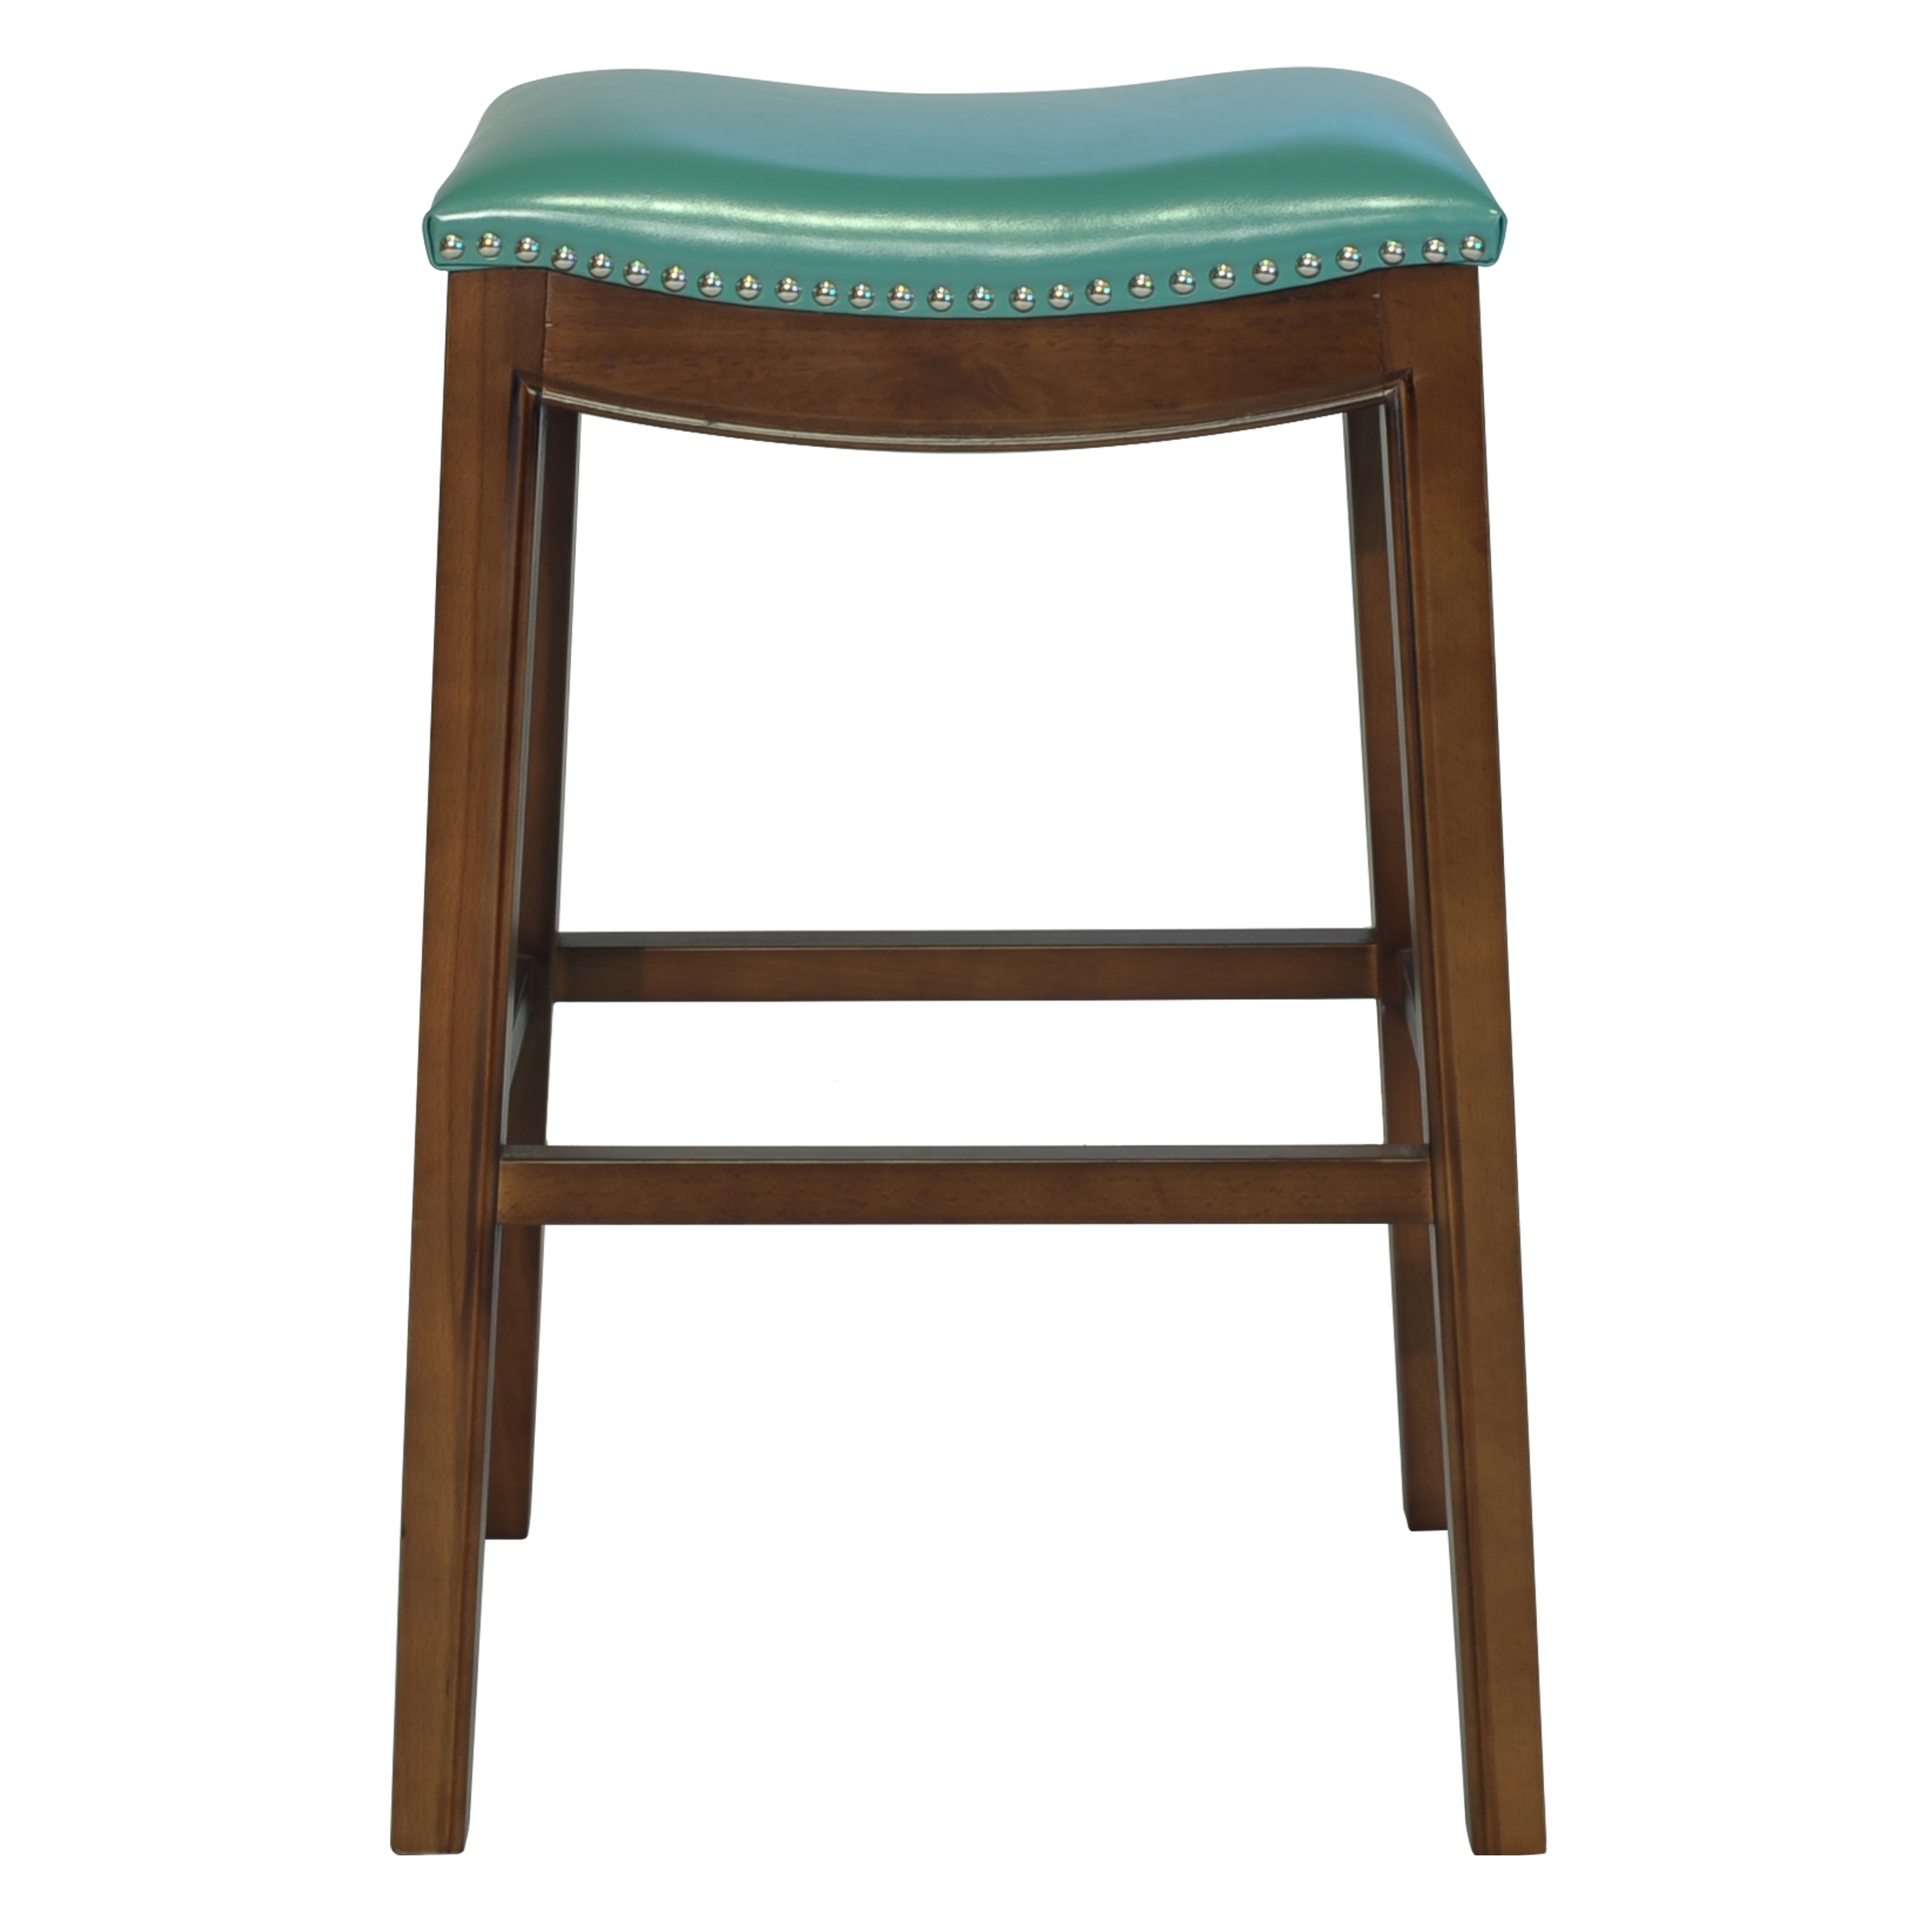 Saddle seat counter stool love these stools they are zen